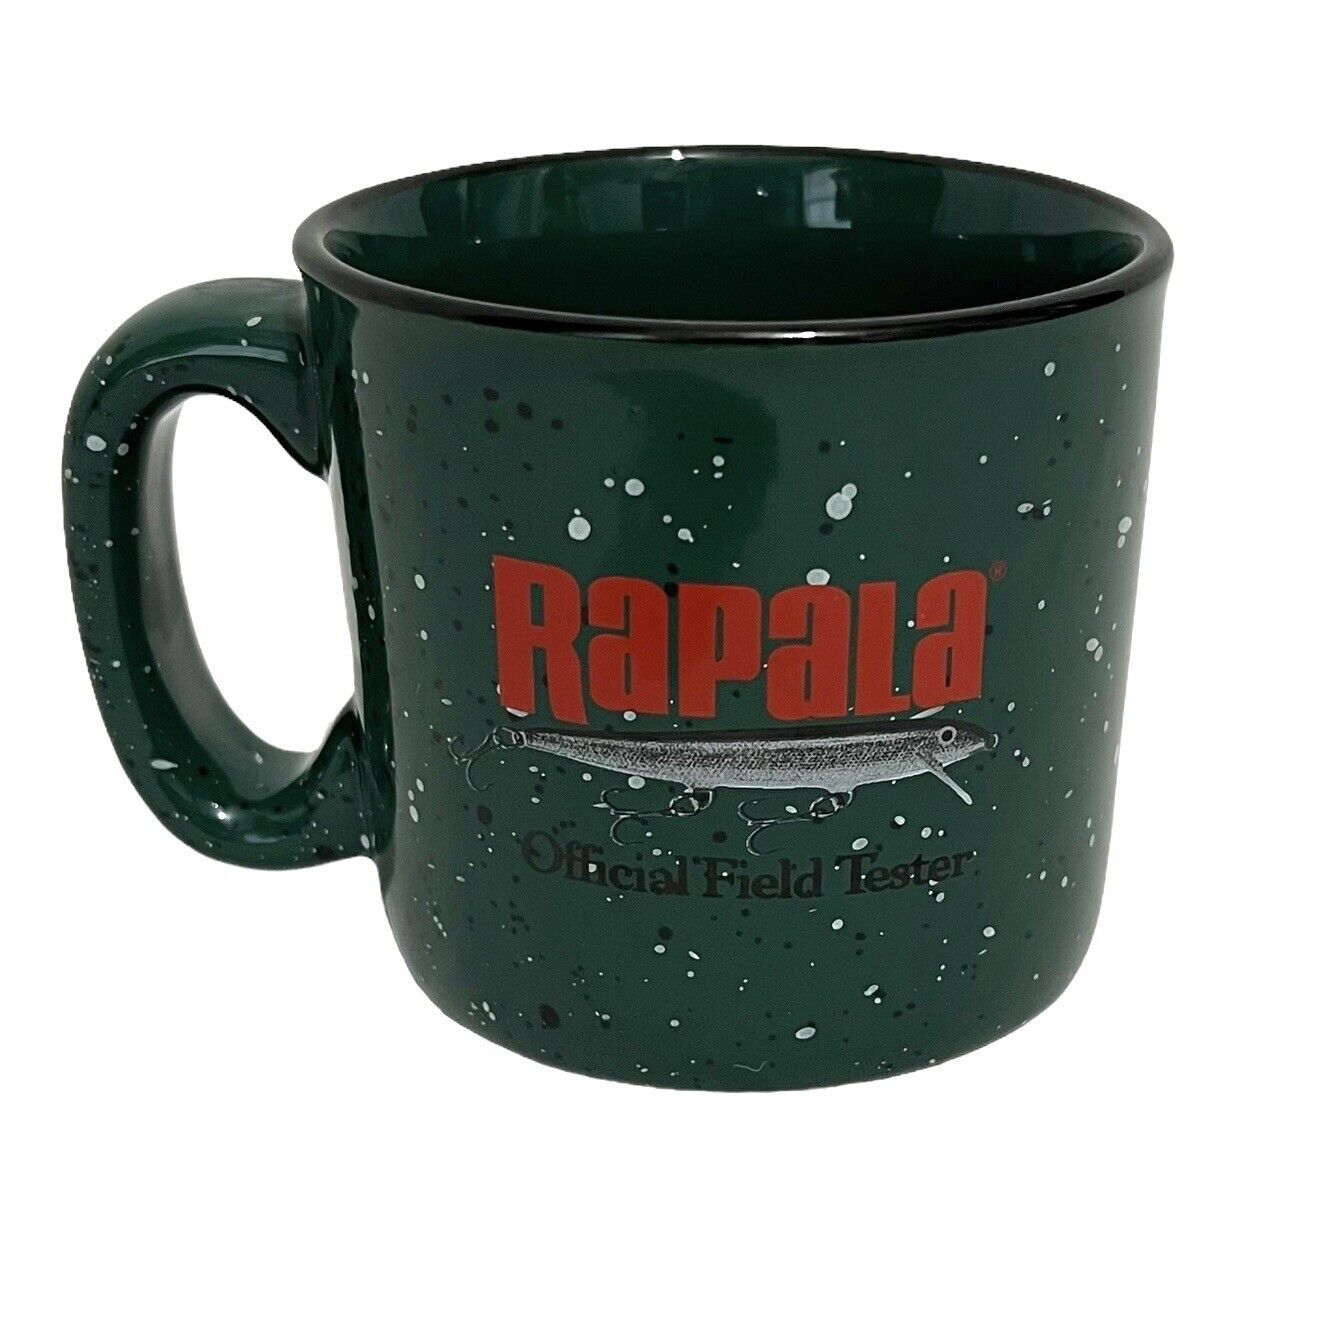 Rapala Fishing Lures Official Field Tester Ceramic 12oz Coffee Mug Cup